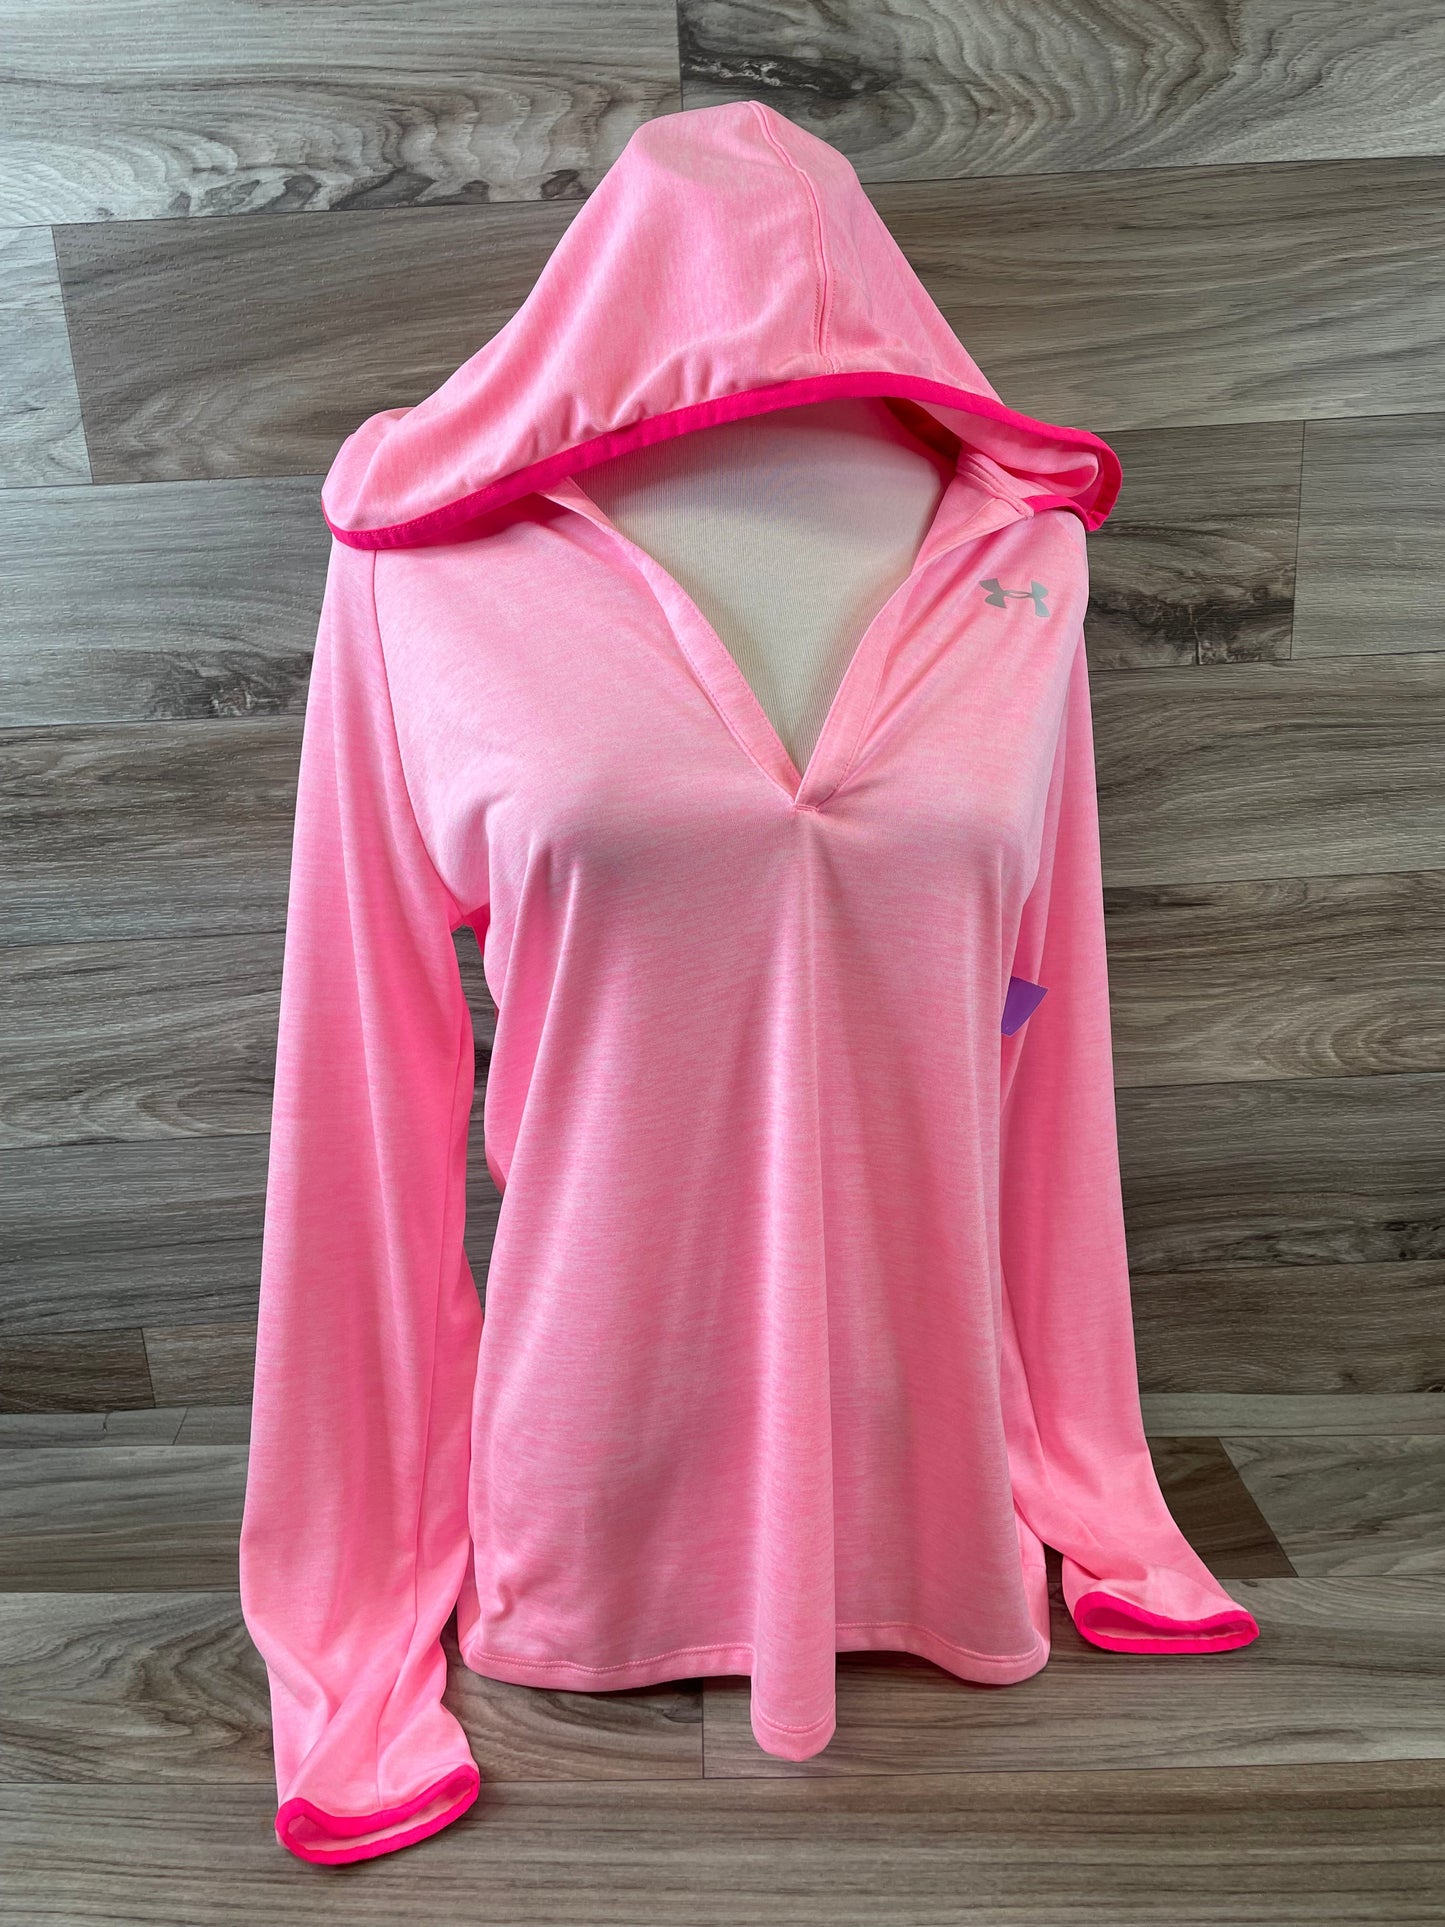 Pink Athletic Top Long Sleeve Hoodie Under Armour, Size M